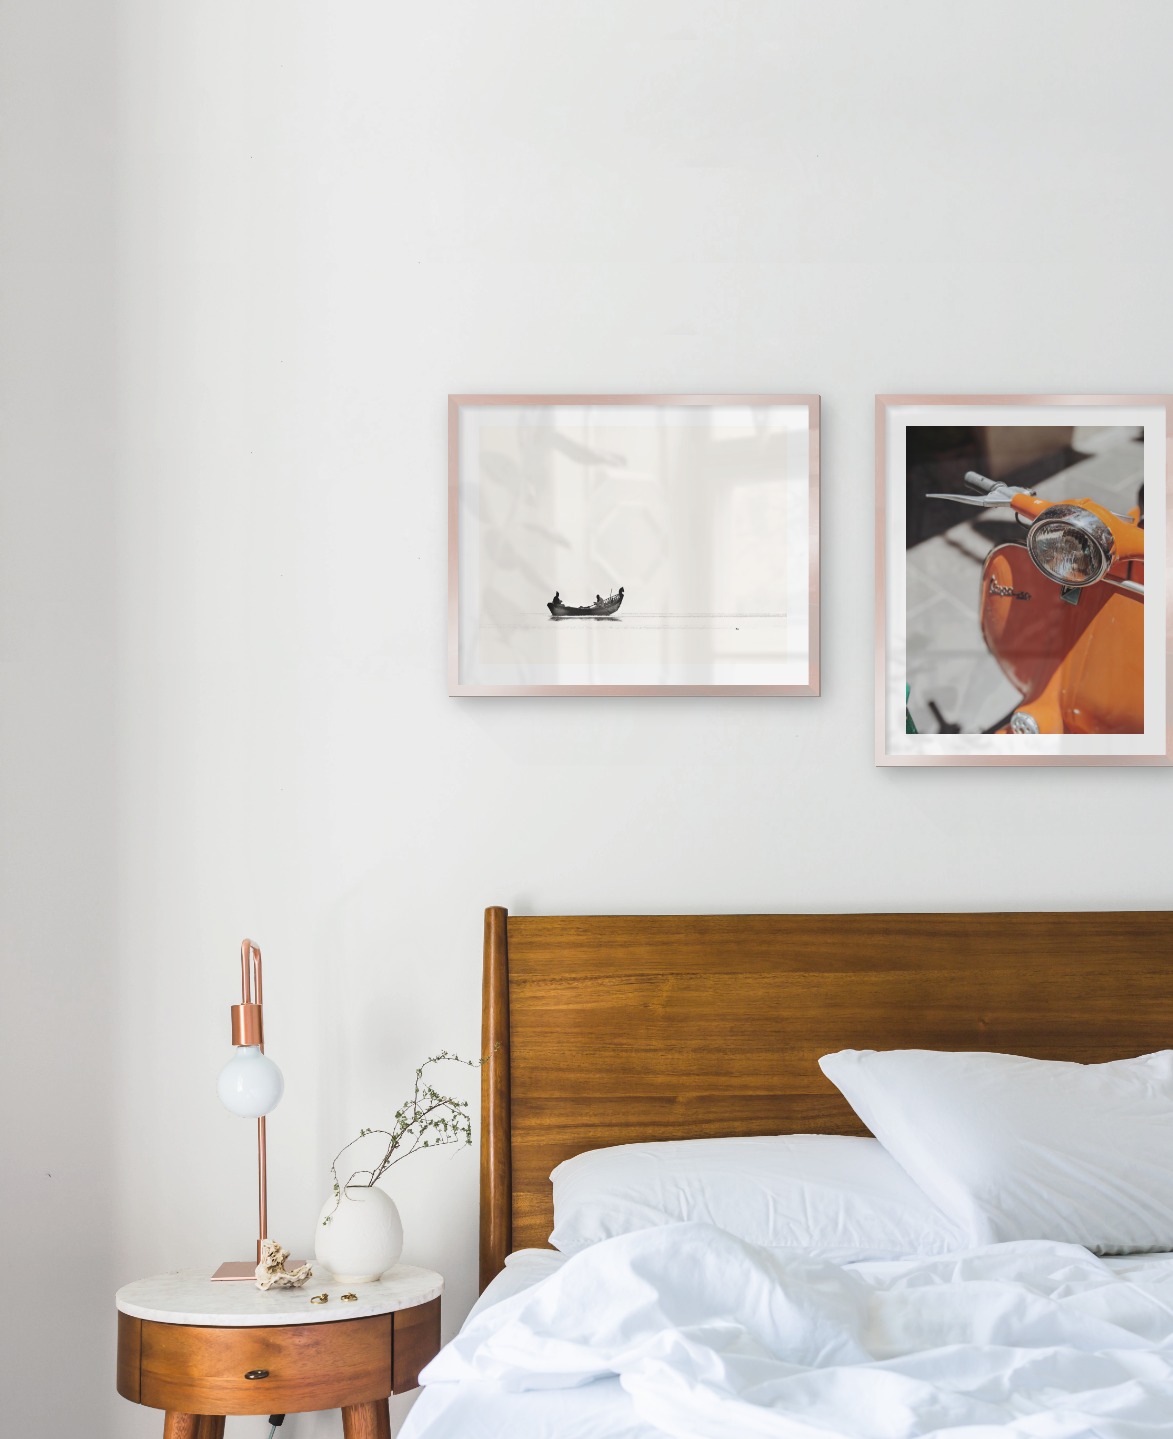 Gallery wall with picture frames in copper in sizes 40x50 with prints "People in boat" and "Orange vespa"